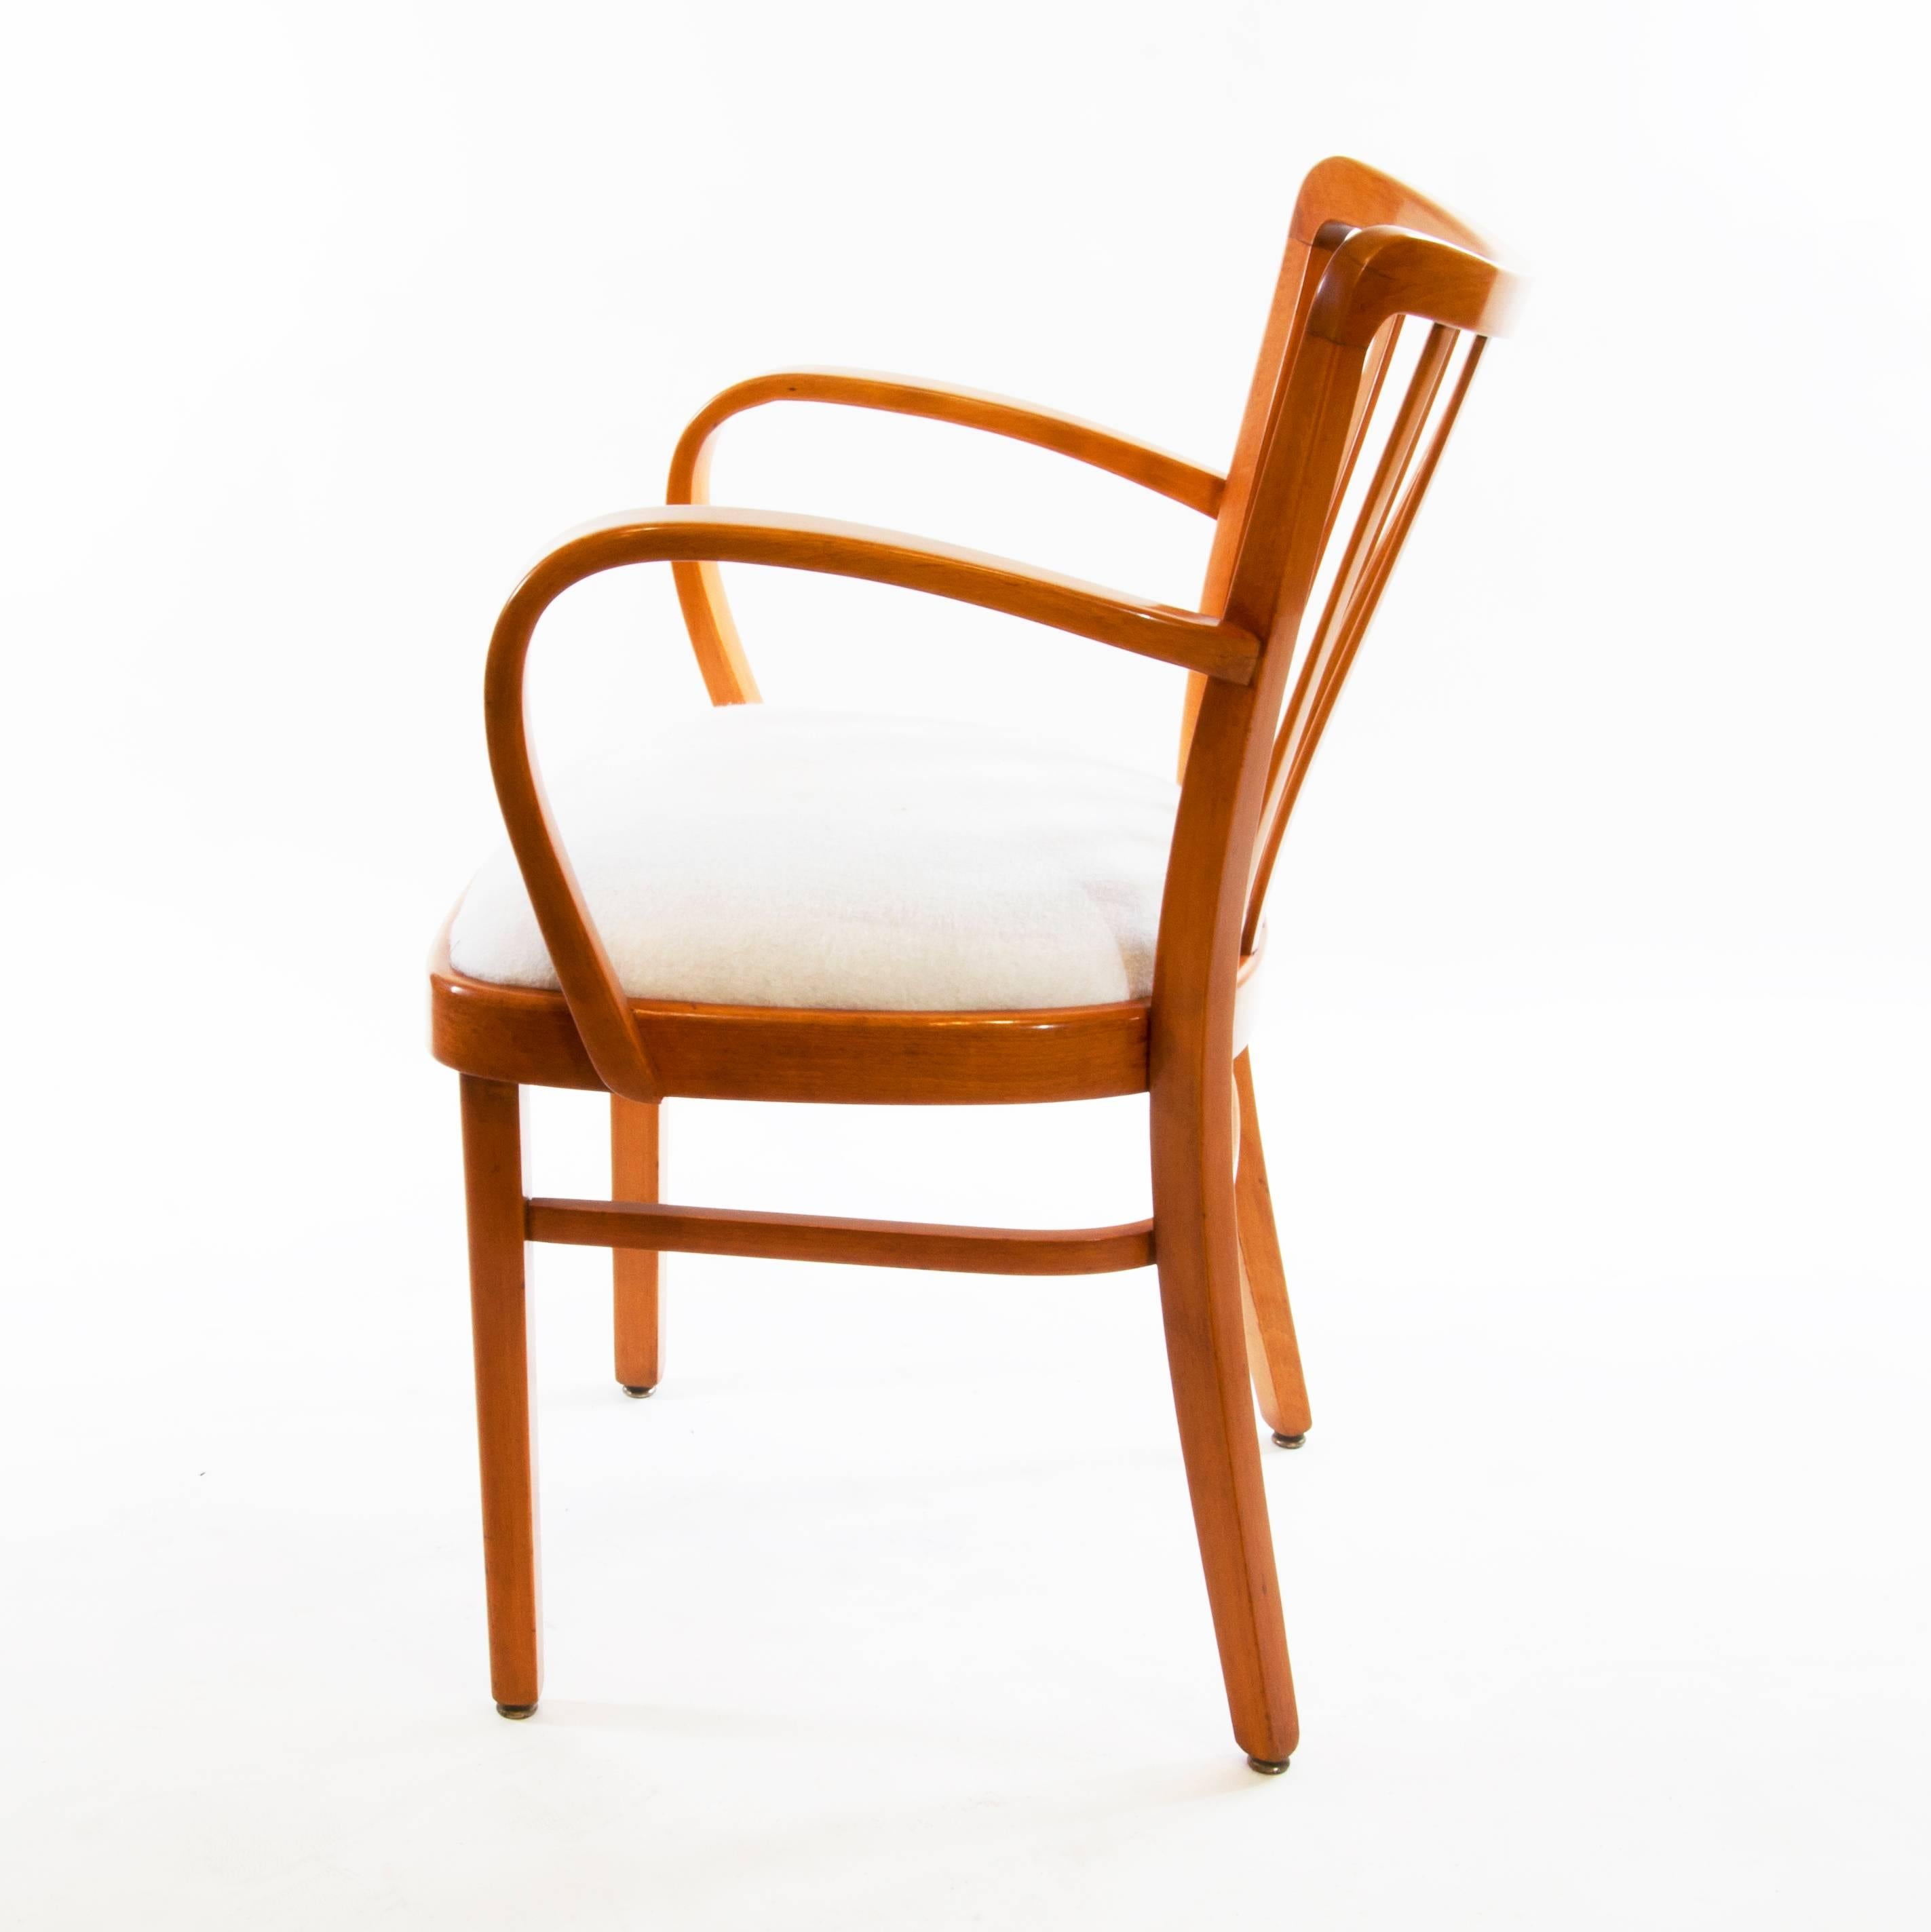 A beautiful example of a Classic, 1930s designed armchair.
Designed by Josef Frank for Thonet.
His design combines functionality and comfort with timeless aesthetics. The chair was in production until the 1950s.

This offered chair is from the